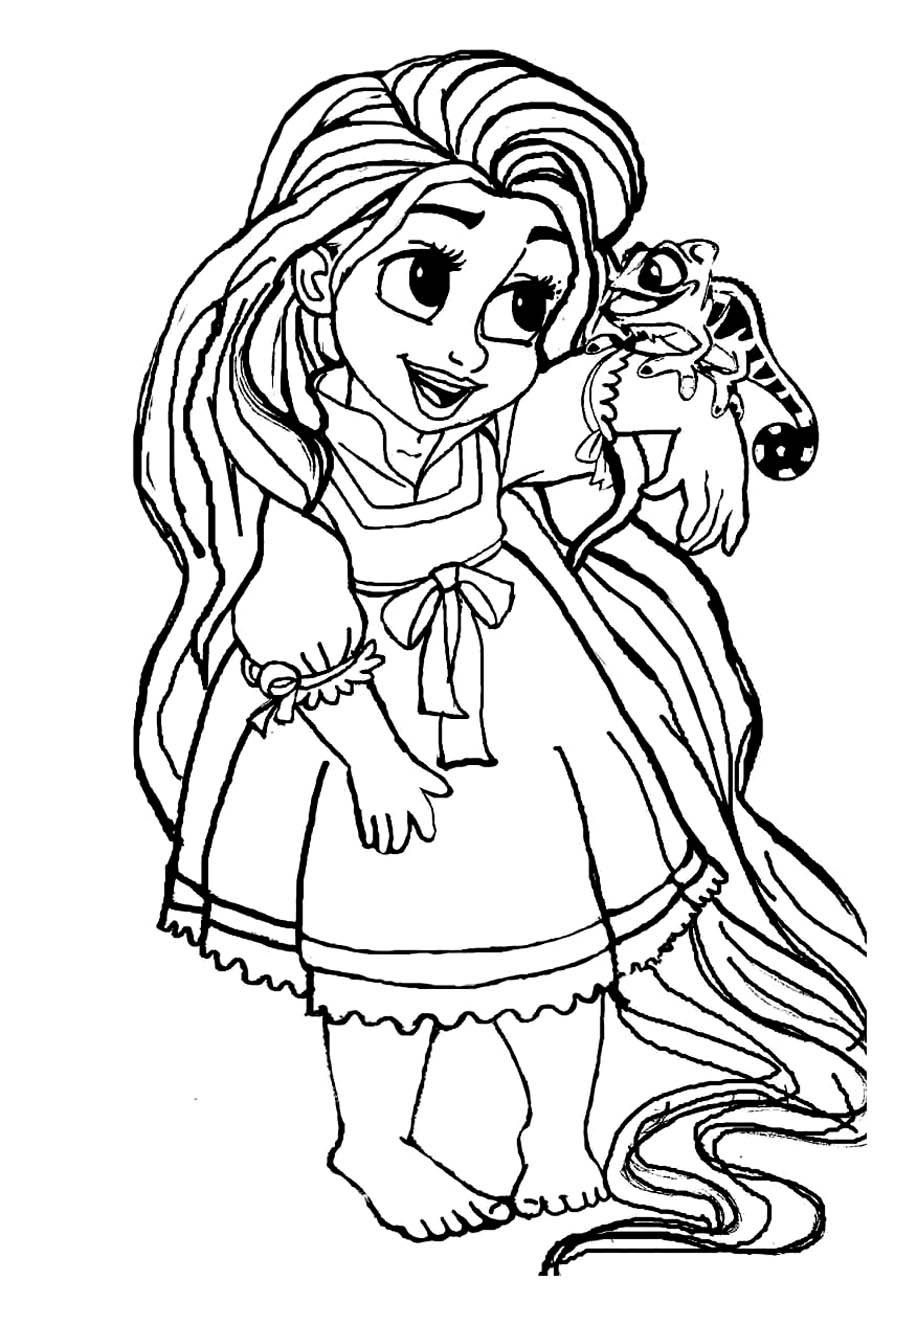 6400 Top Rapunzel Coloring Pages Free Download Pictures